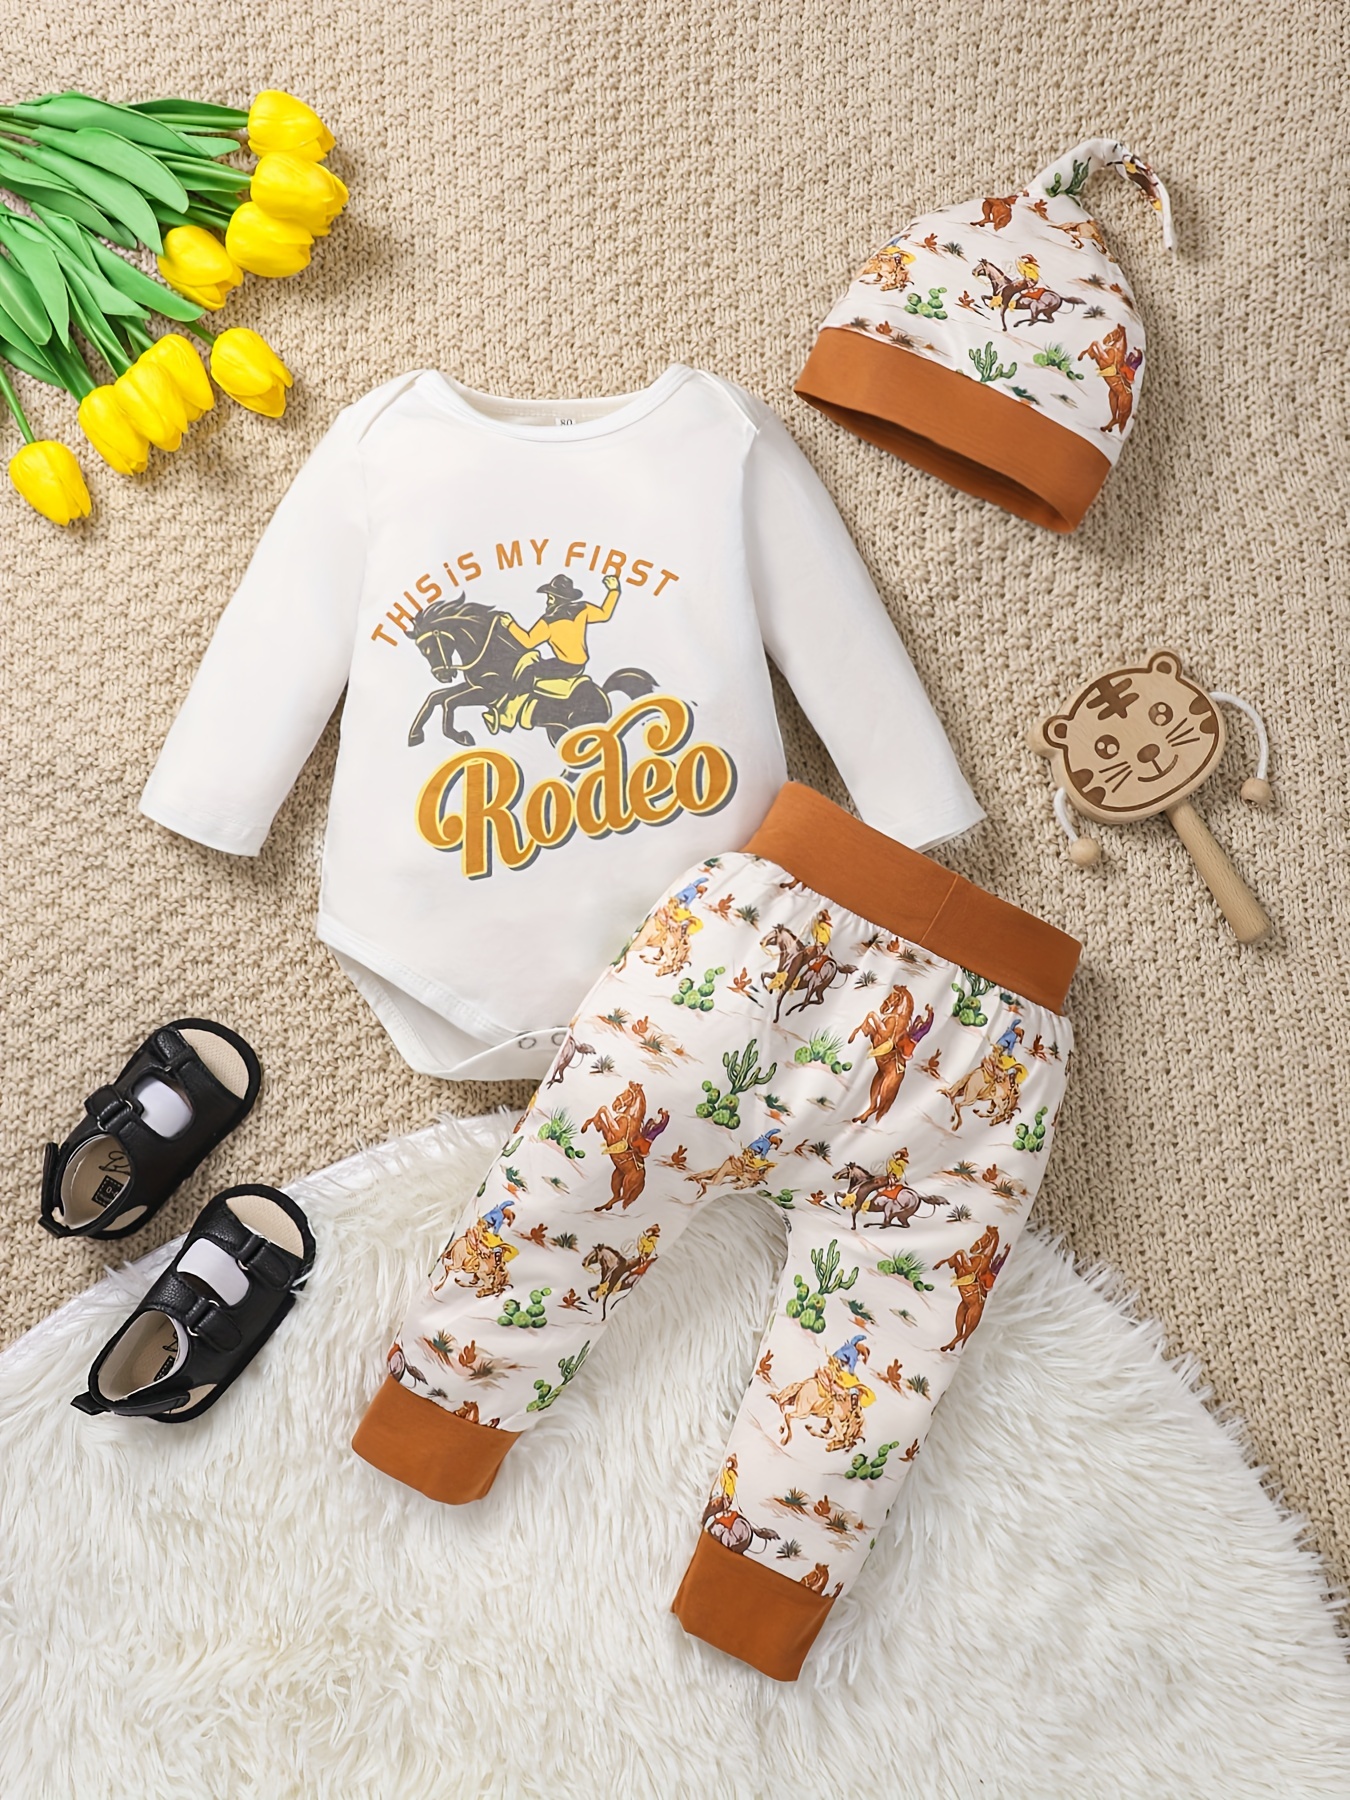 Western Baby Girl Clothes - Temu